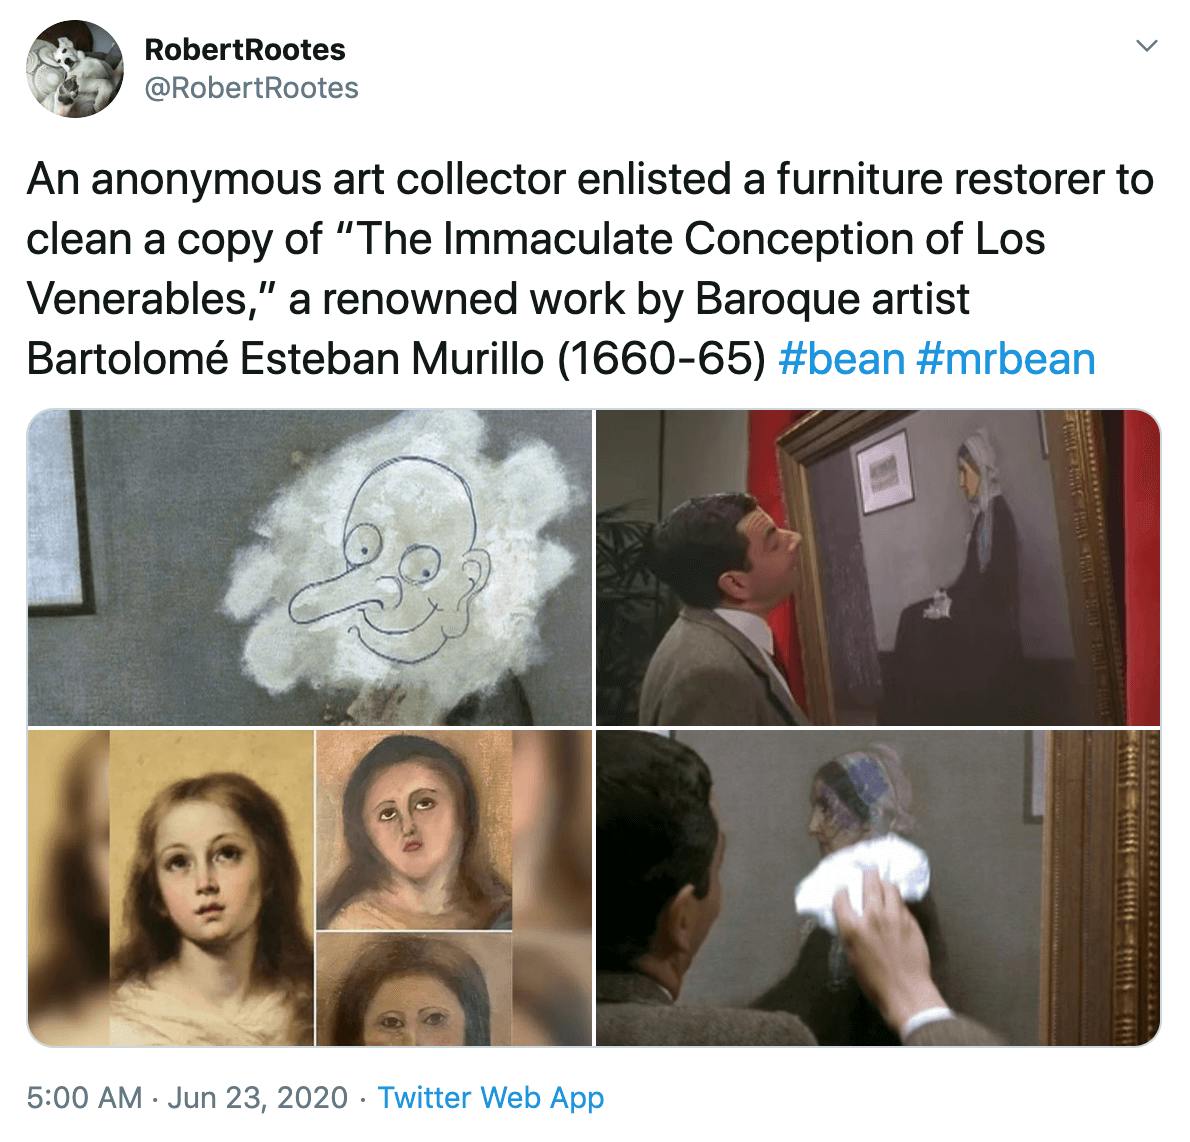 "An anonymous art collector enlisted a furniture restorer to clean a copy of “The Immaculate Conception of Los Venerables,” a renowned work by Baroque artist Bartolomé Esteban Murillo (1660-65) #bean #mrbean" Images of the original and the botched repair next to images from the Mr. Bean movie where Mr. Bean did the same thing